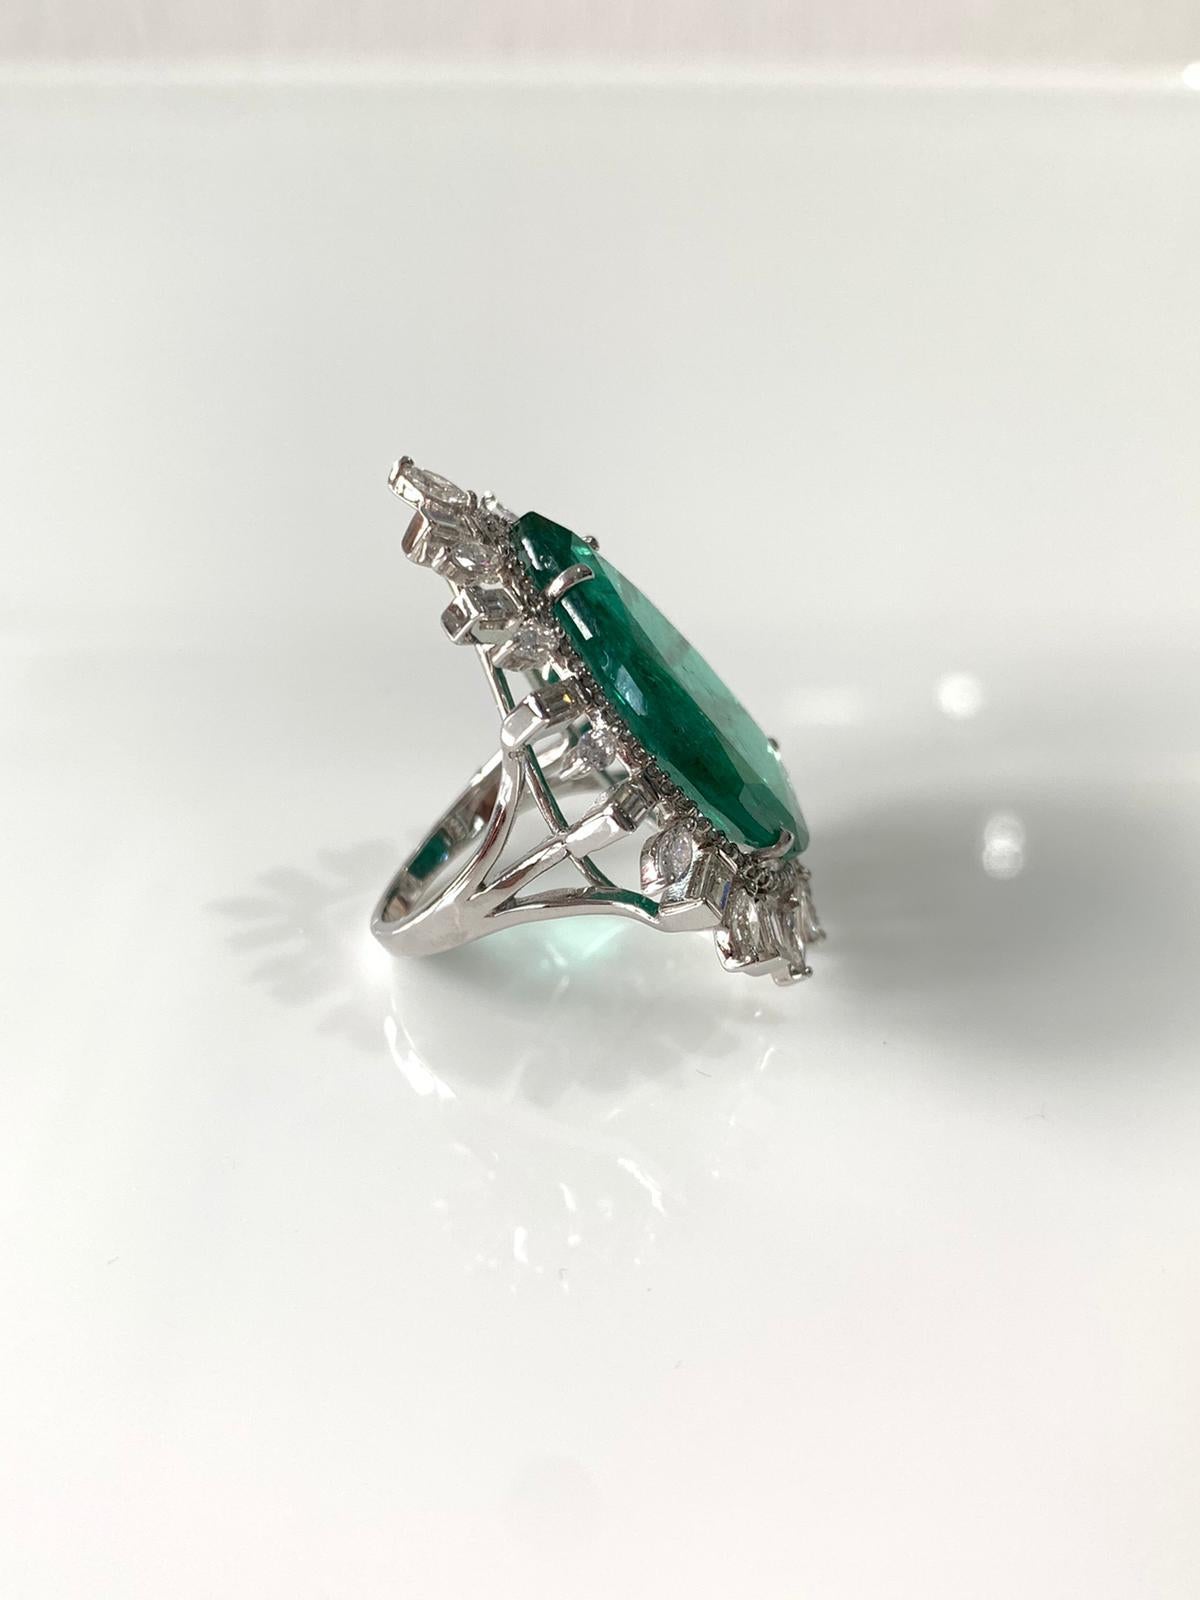 A gorgeous cocktail ring set in 18k white gold with natural pear cut emerald and natural diamond. The emerald is natural from Zambia and weight is 18.74 carats, diamond is natural and weight is 2.73 carats. The net gold weight is 10.56 grams and